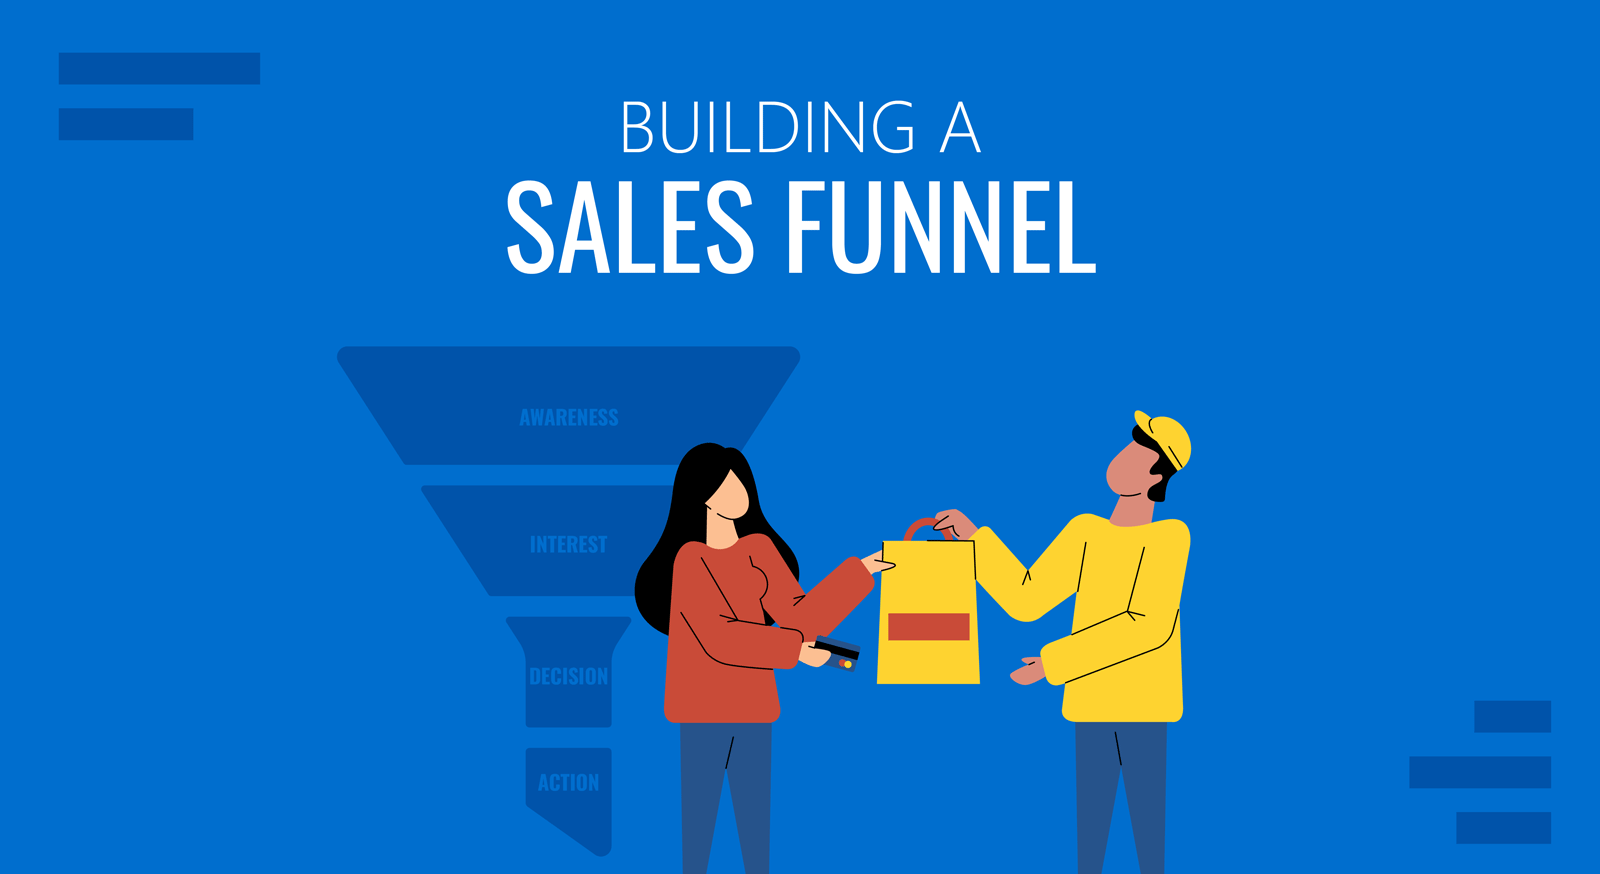 Building a Sales Funnel: Stages, How to Build, Examples, and Templates Included